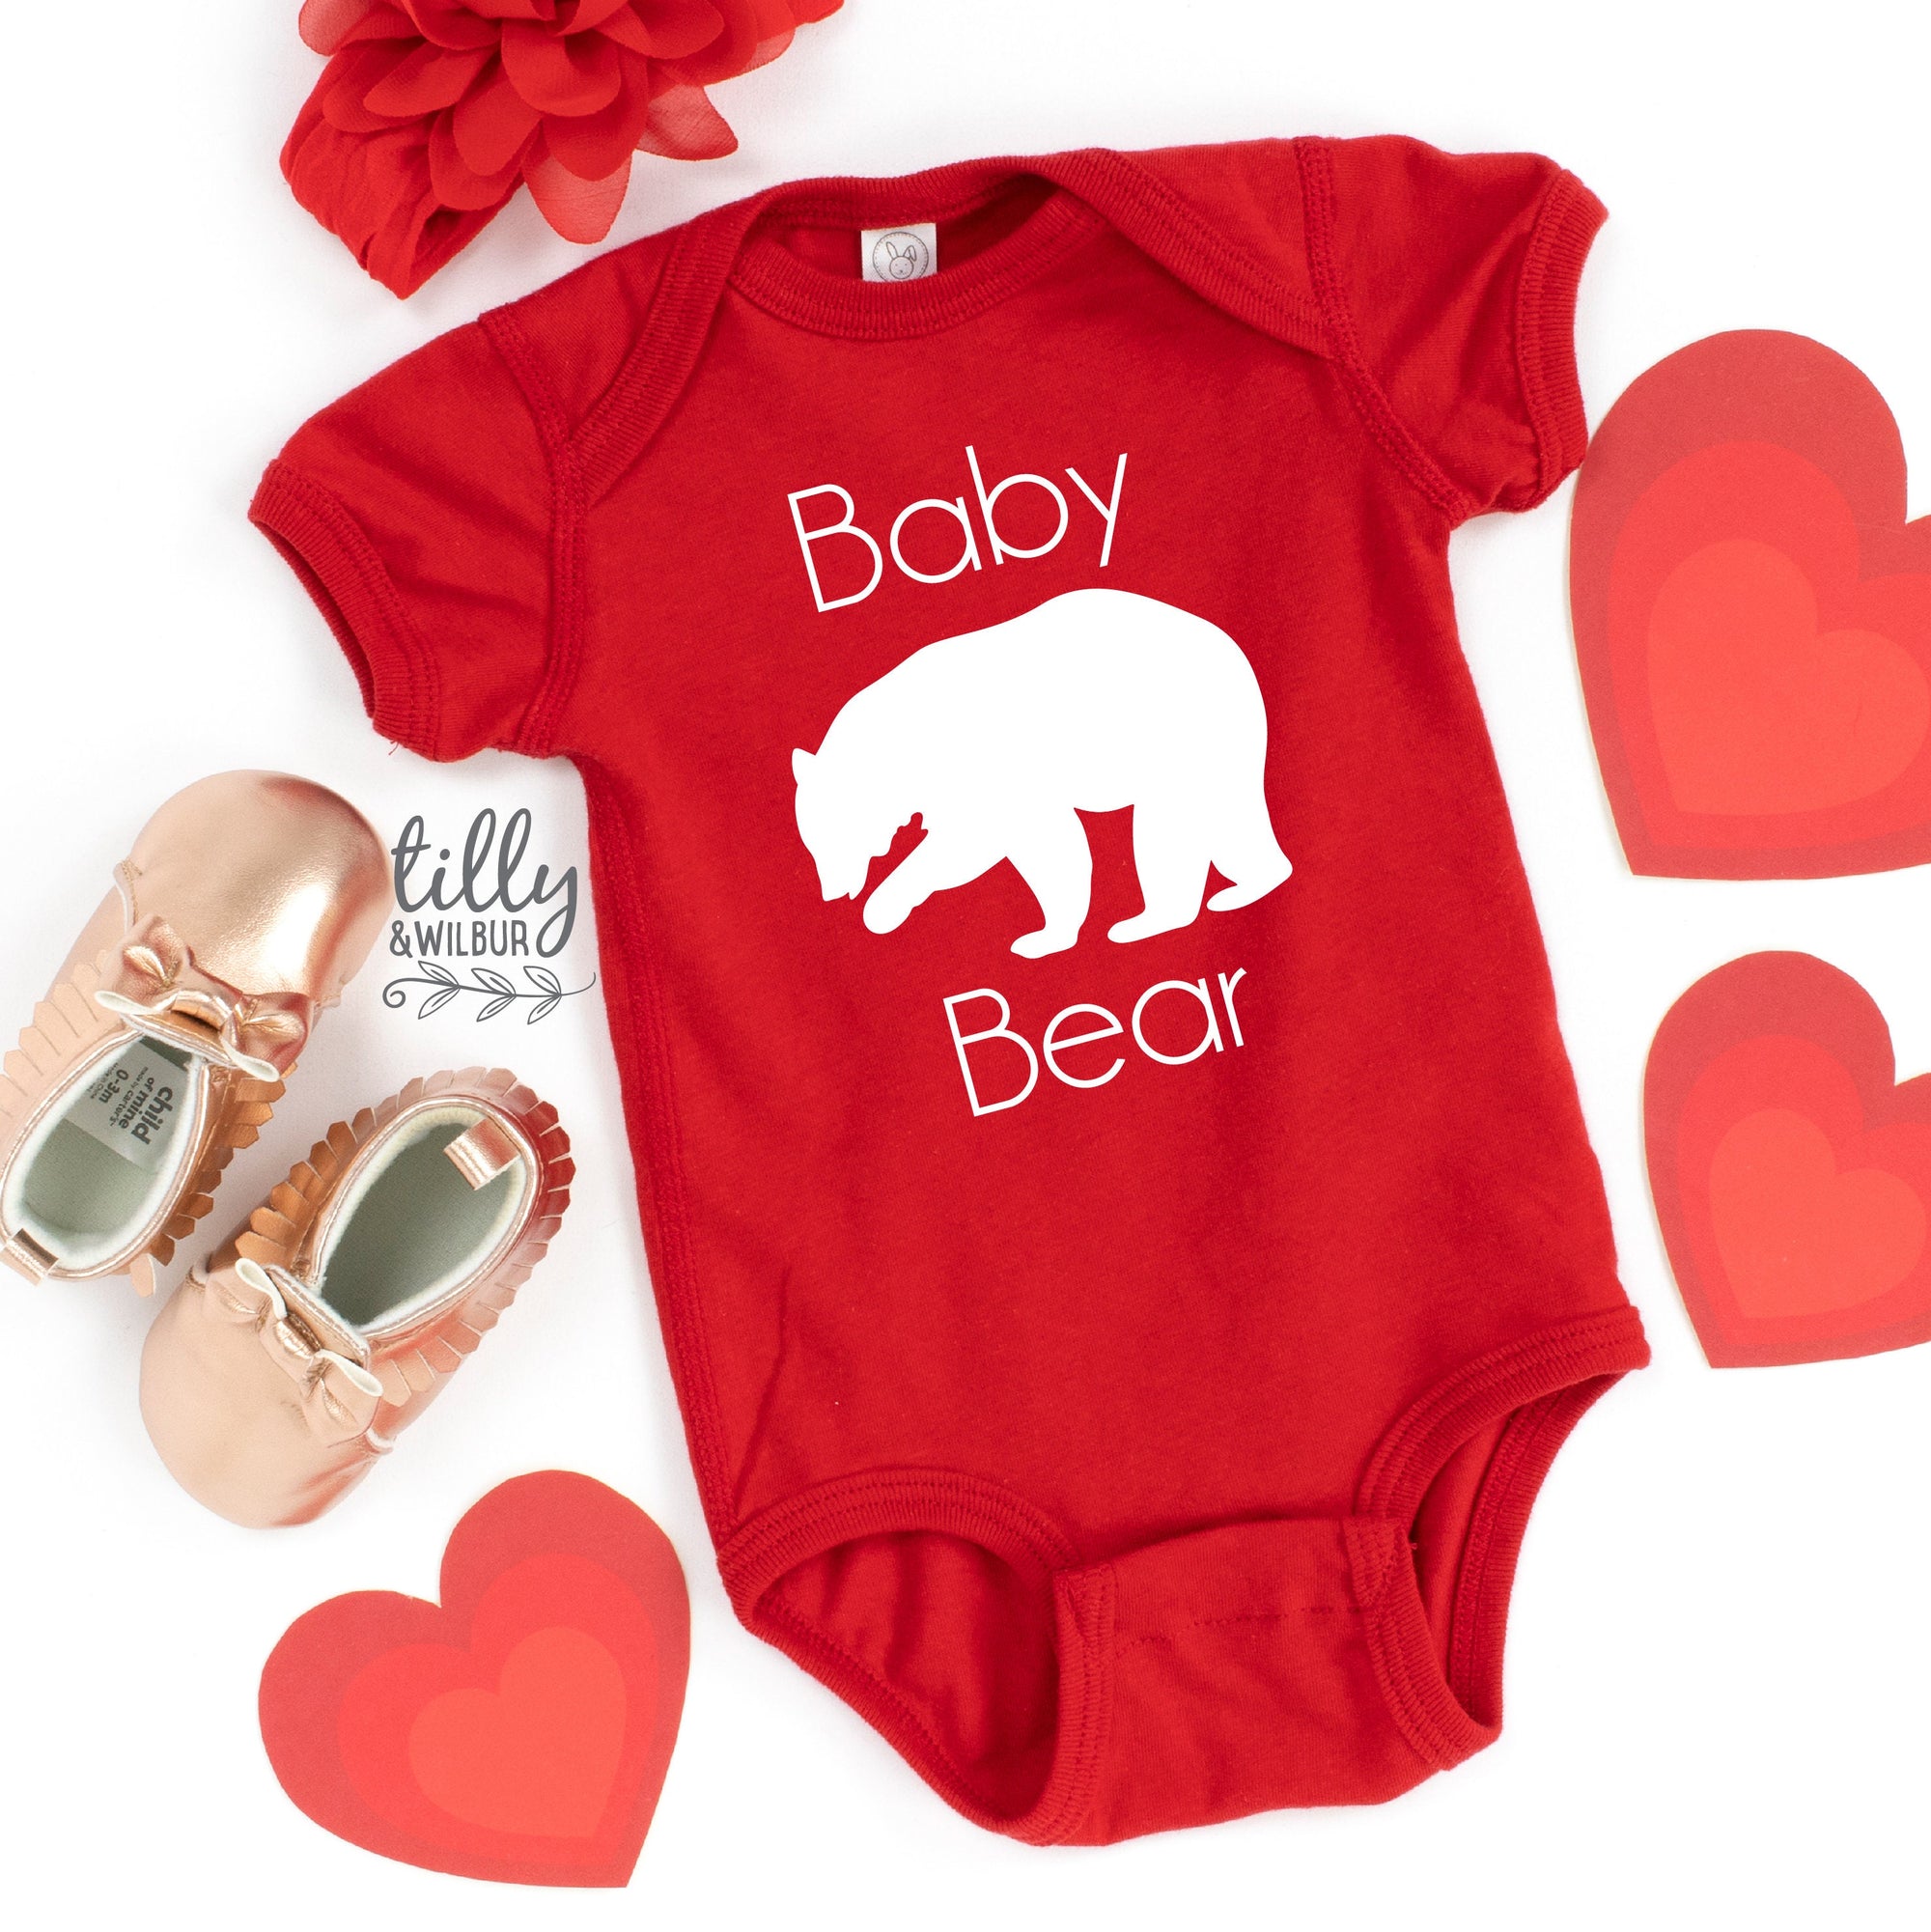 Baby Bear Bodysuit, Add To Matching Set For Growing Bub, Matching Mother's Day Bodysuit, Matching Father's Day Bodysuit, Matching Family